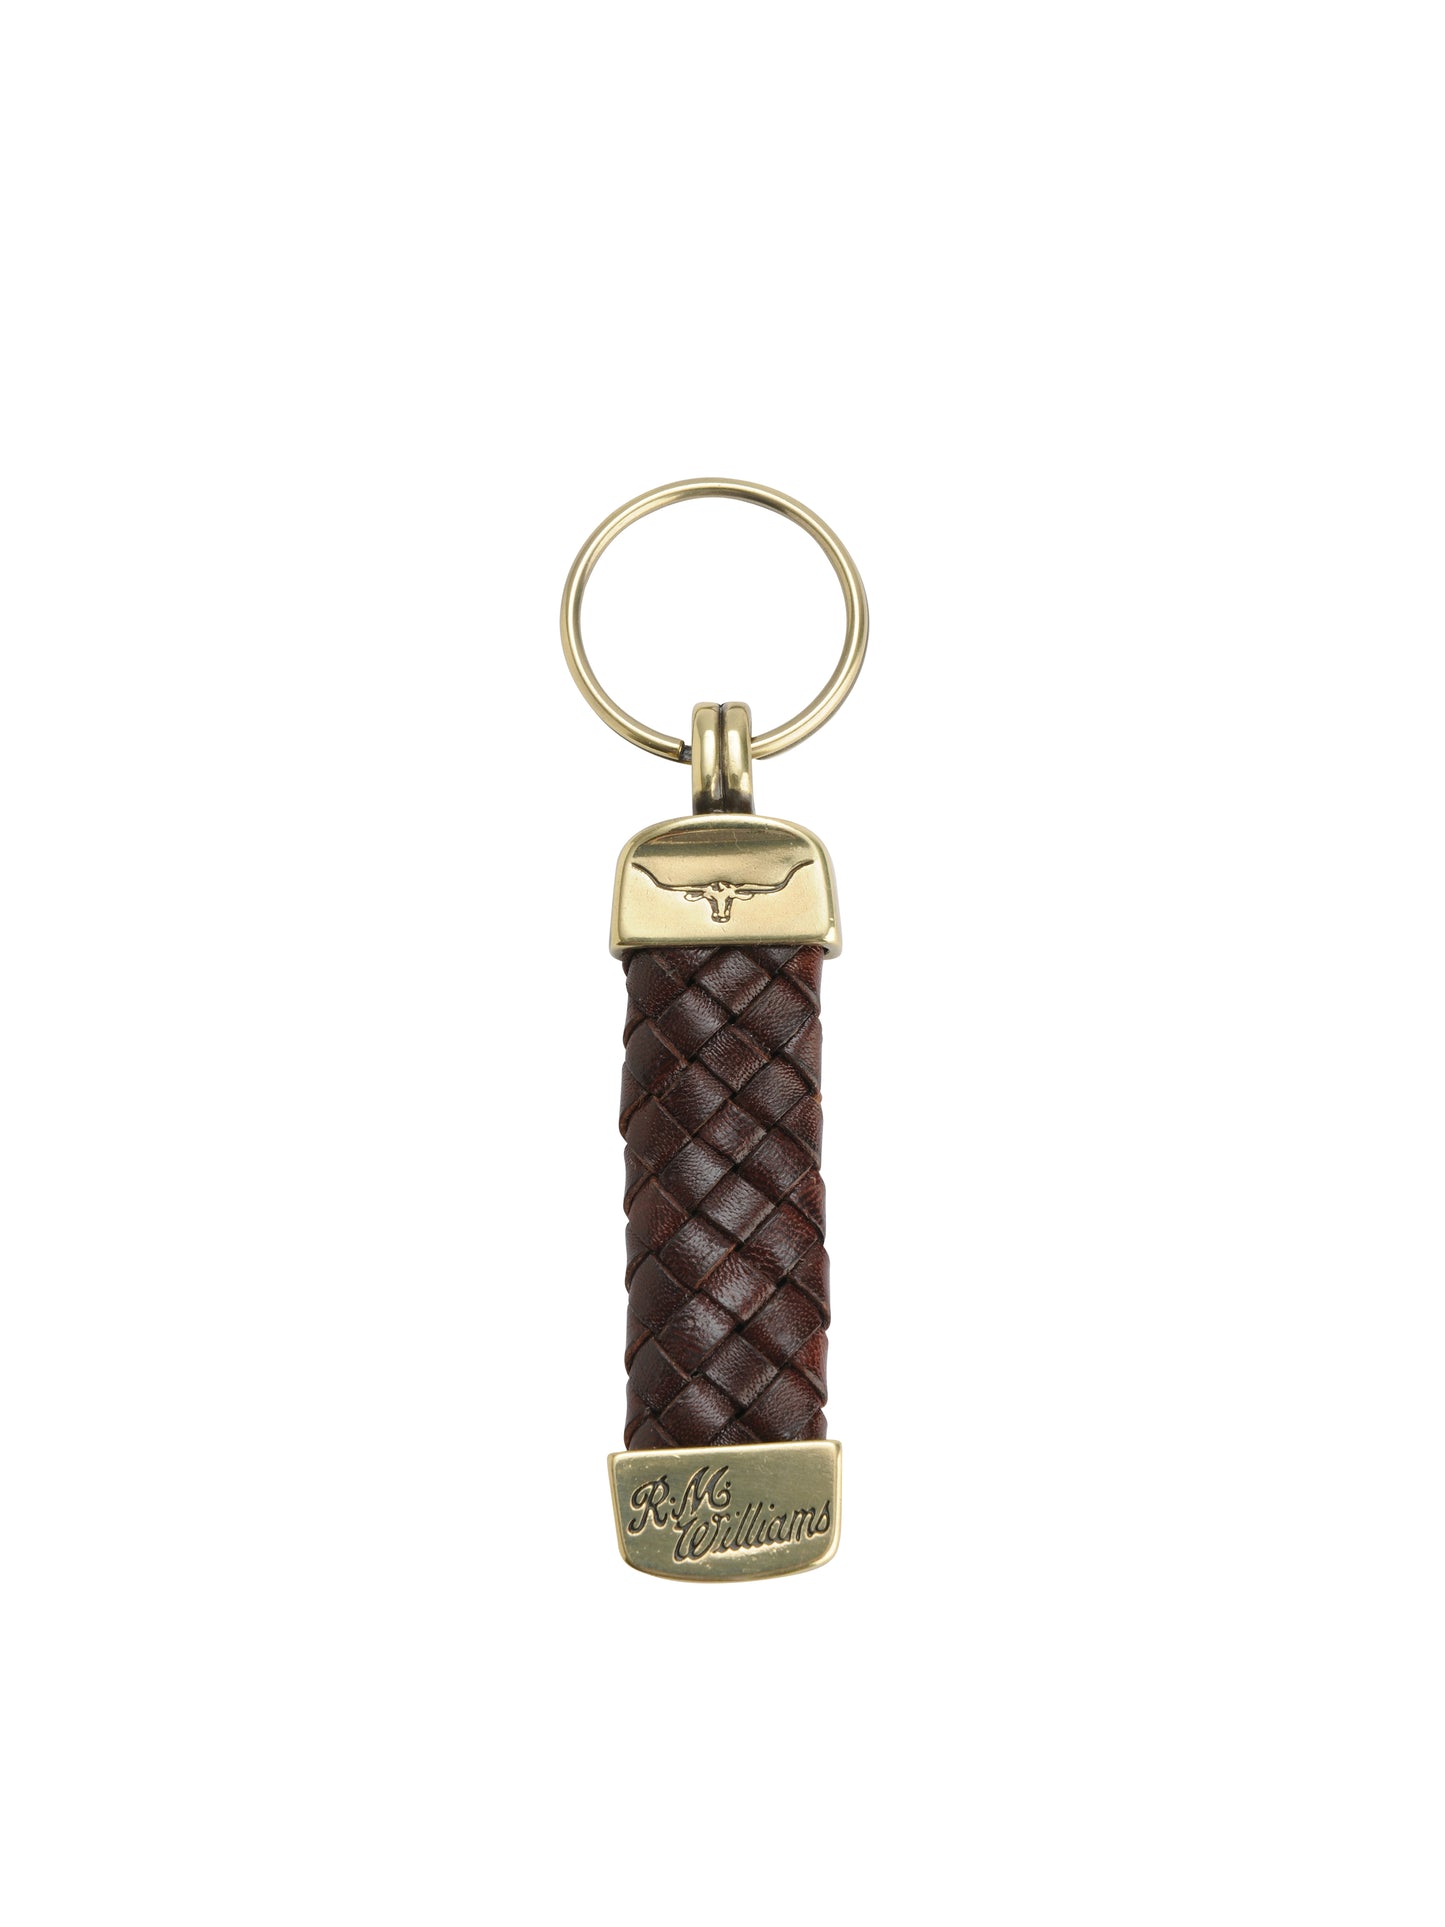 RM Williams CG962.06 Brown Plaited Key Ring - Brass Fitting